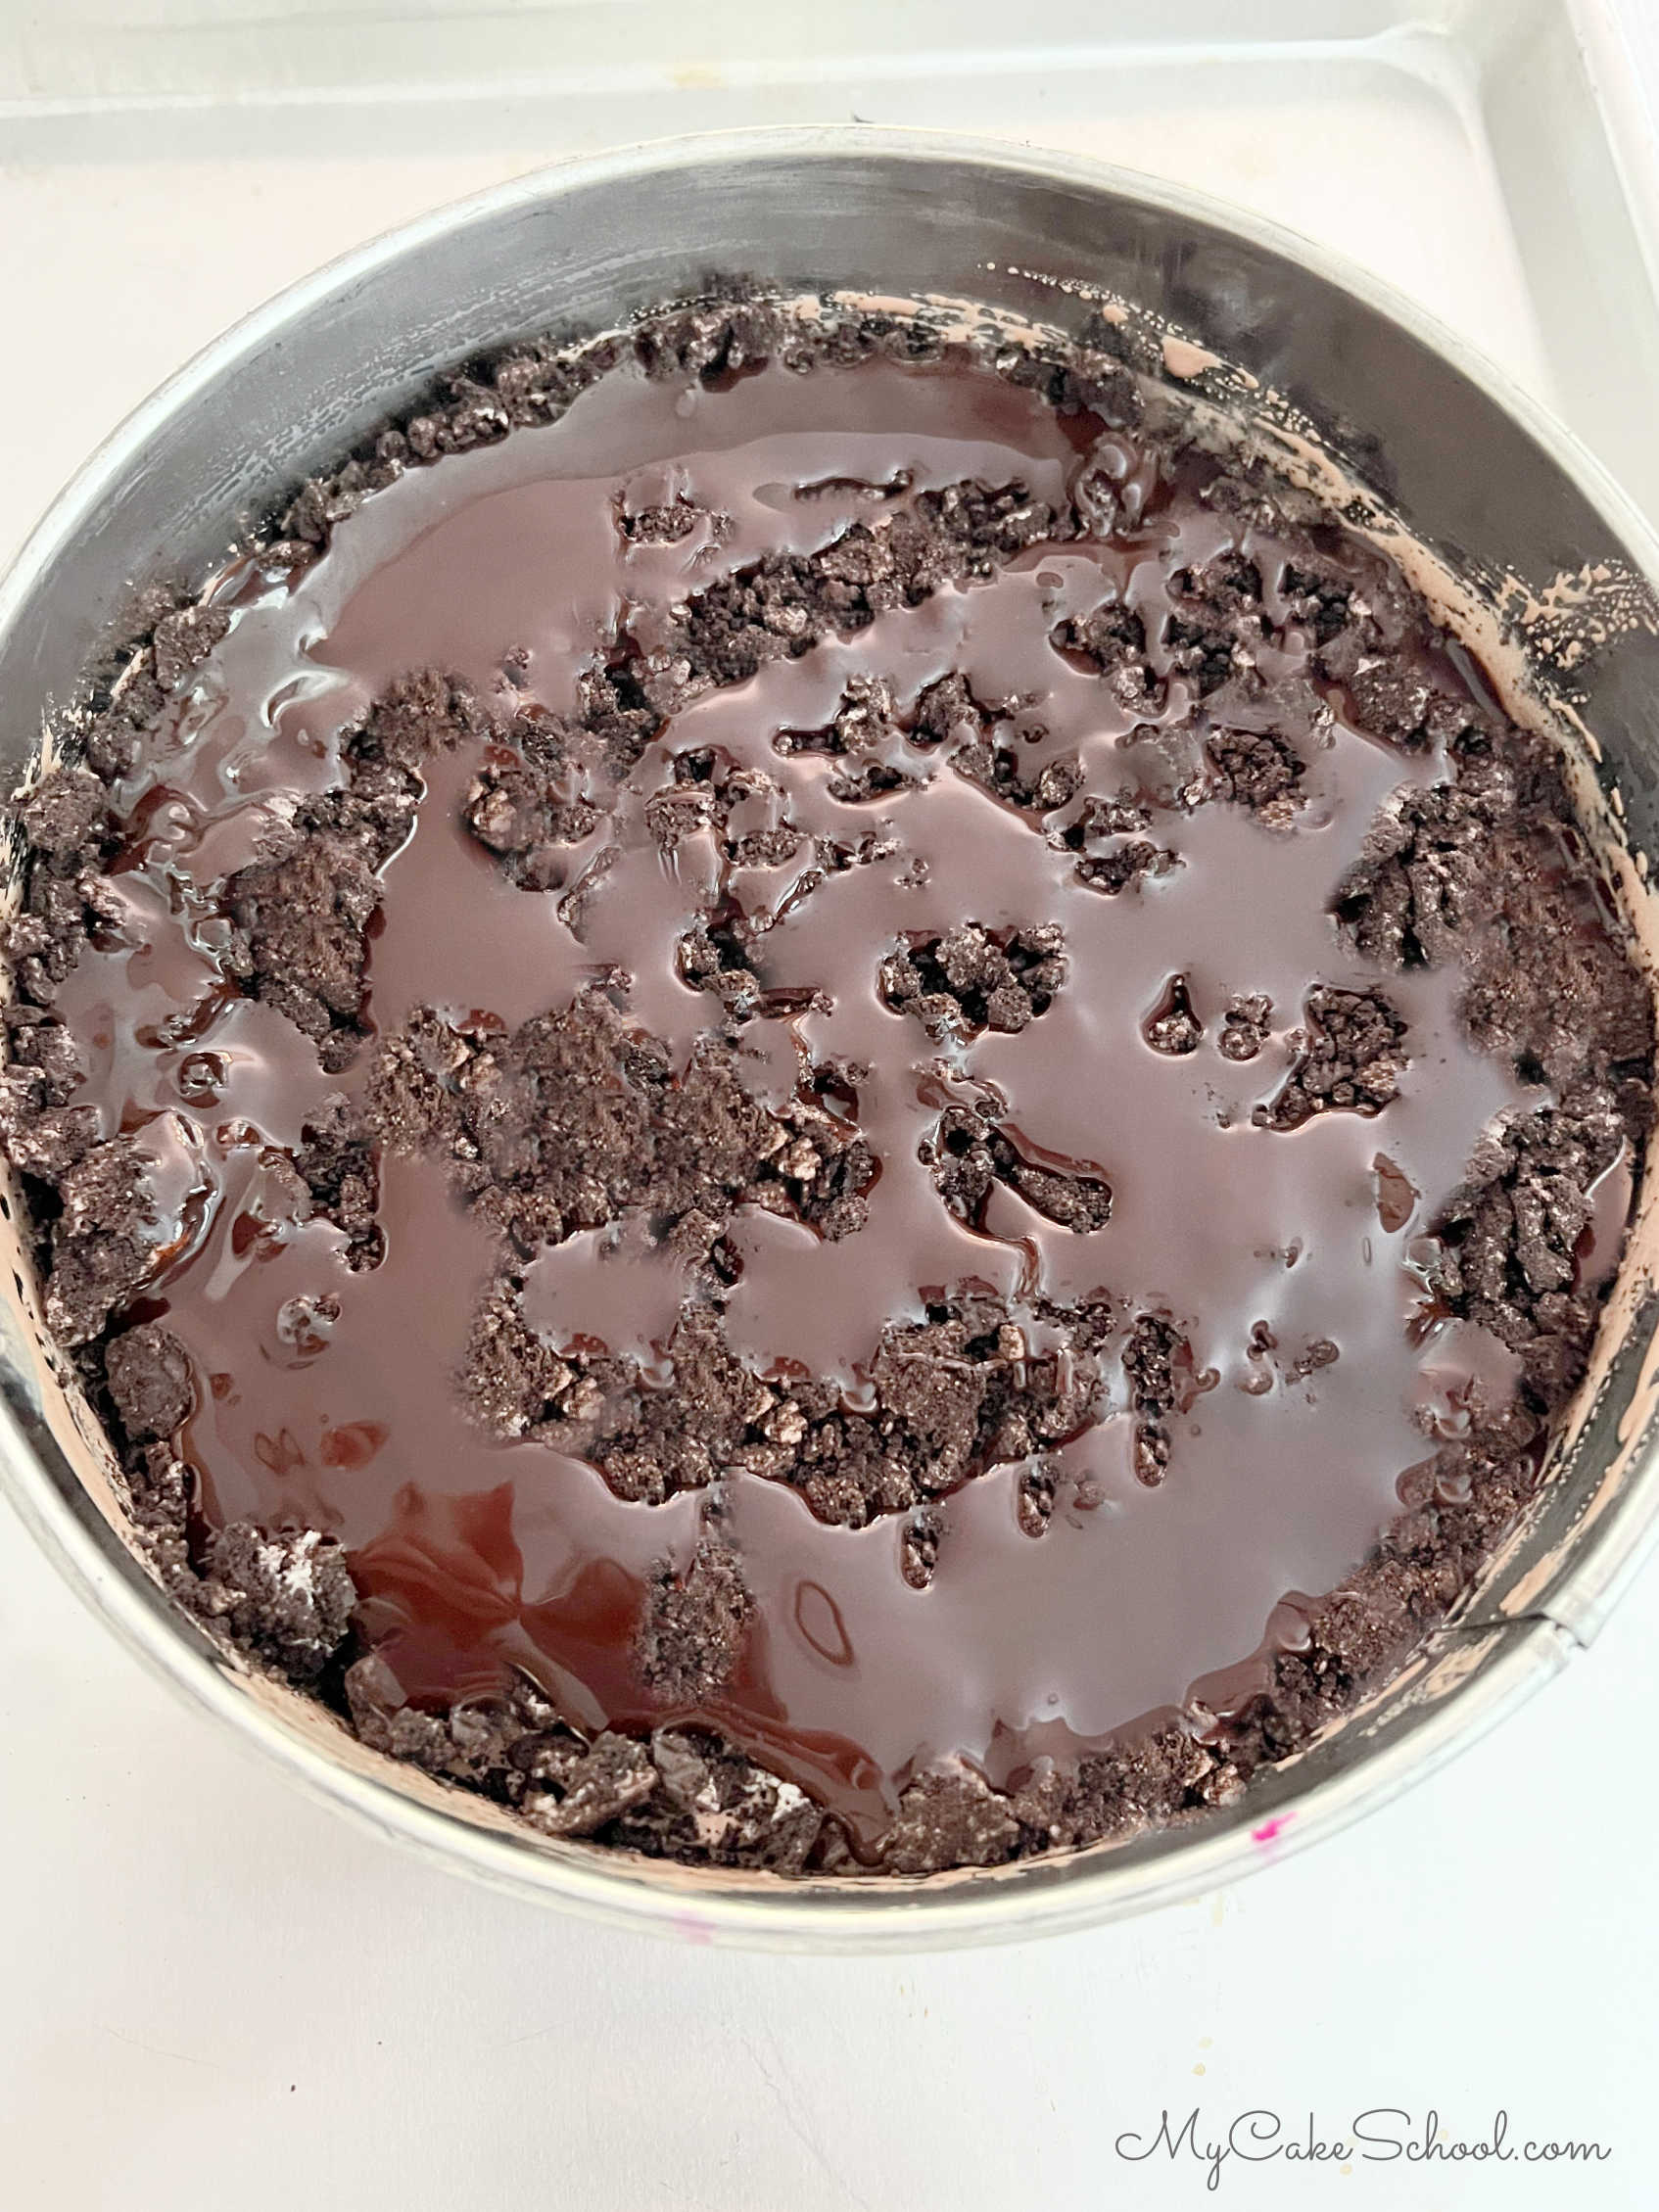 Layer of crushed Oreos and hot fudge